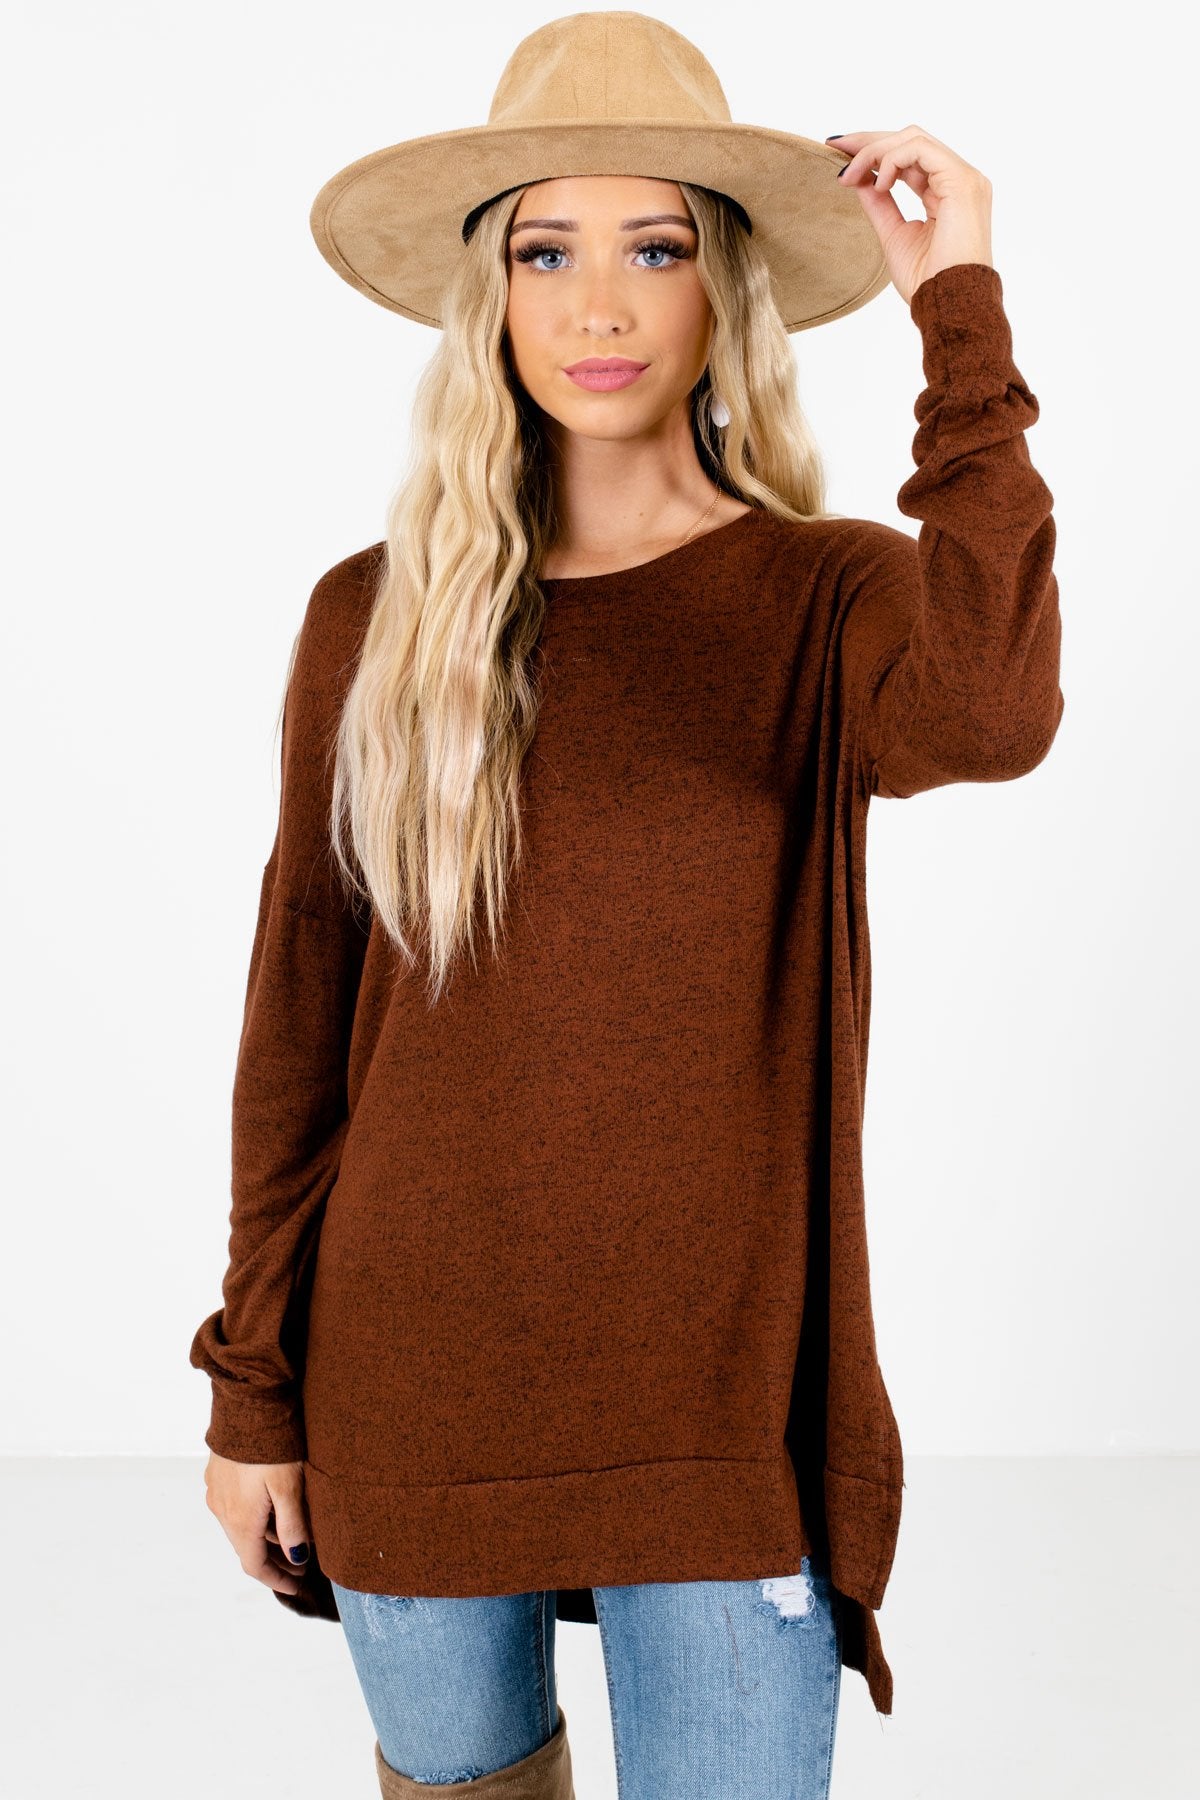 Brown High-Quality Soft Material Boutique Tops for Women